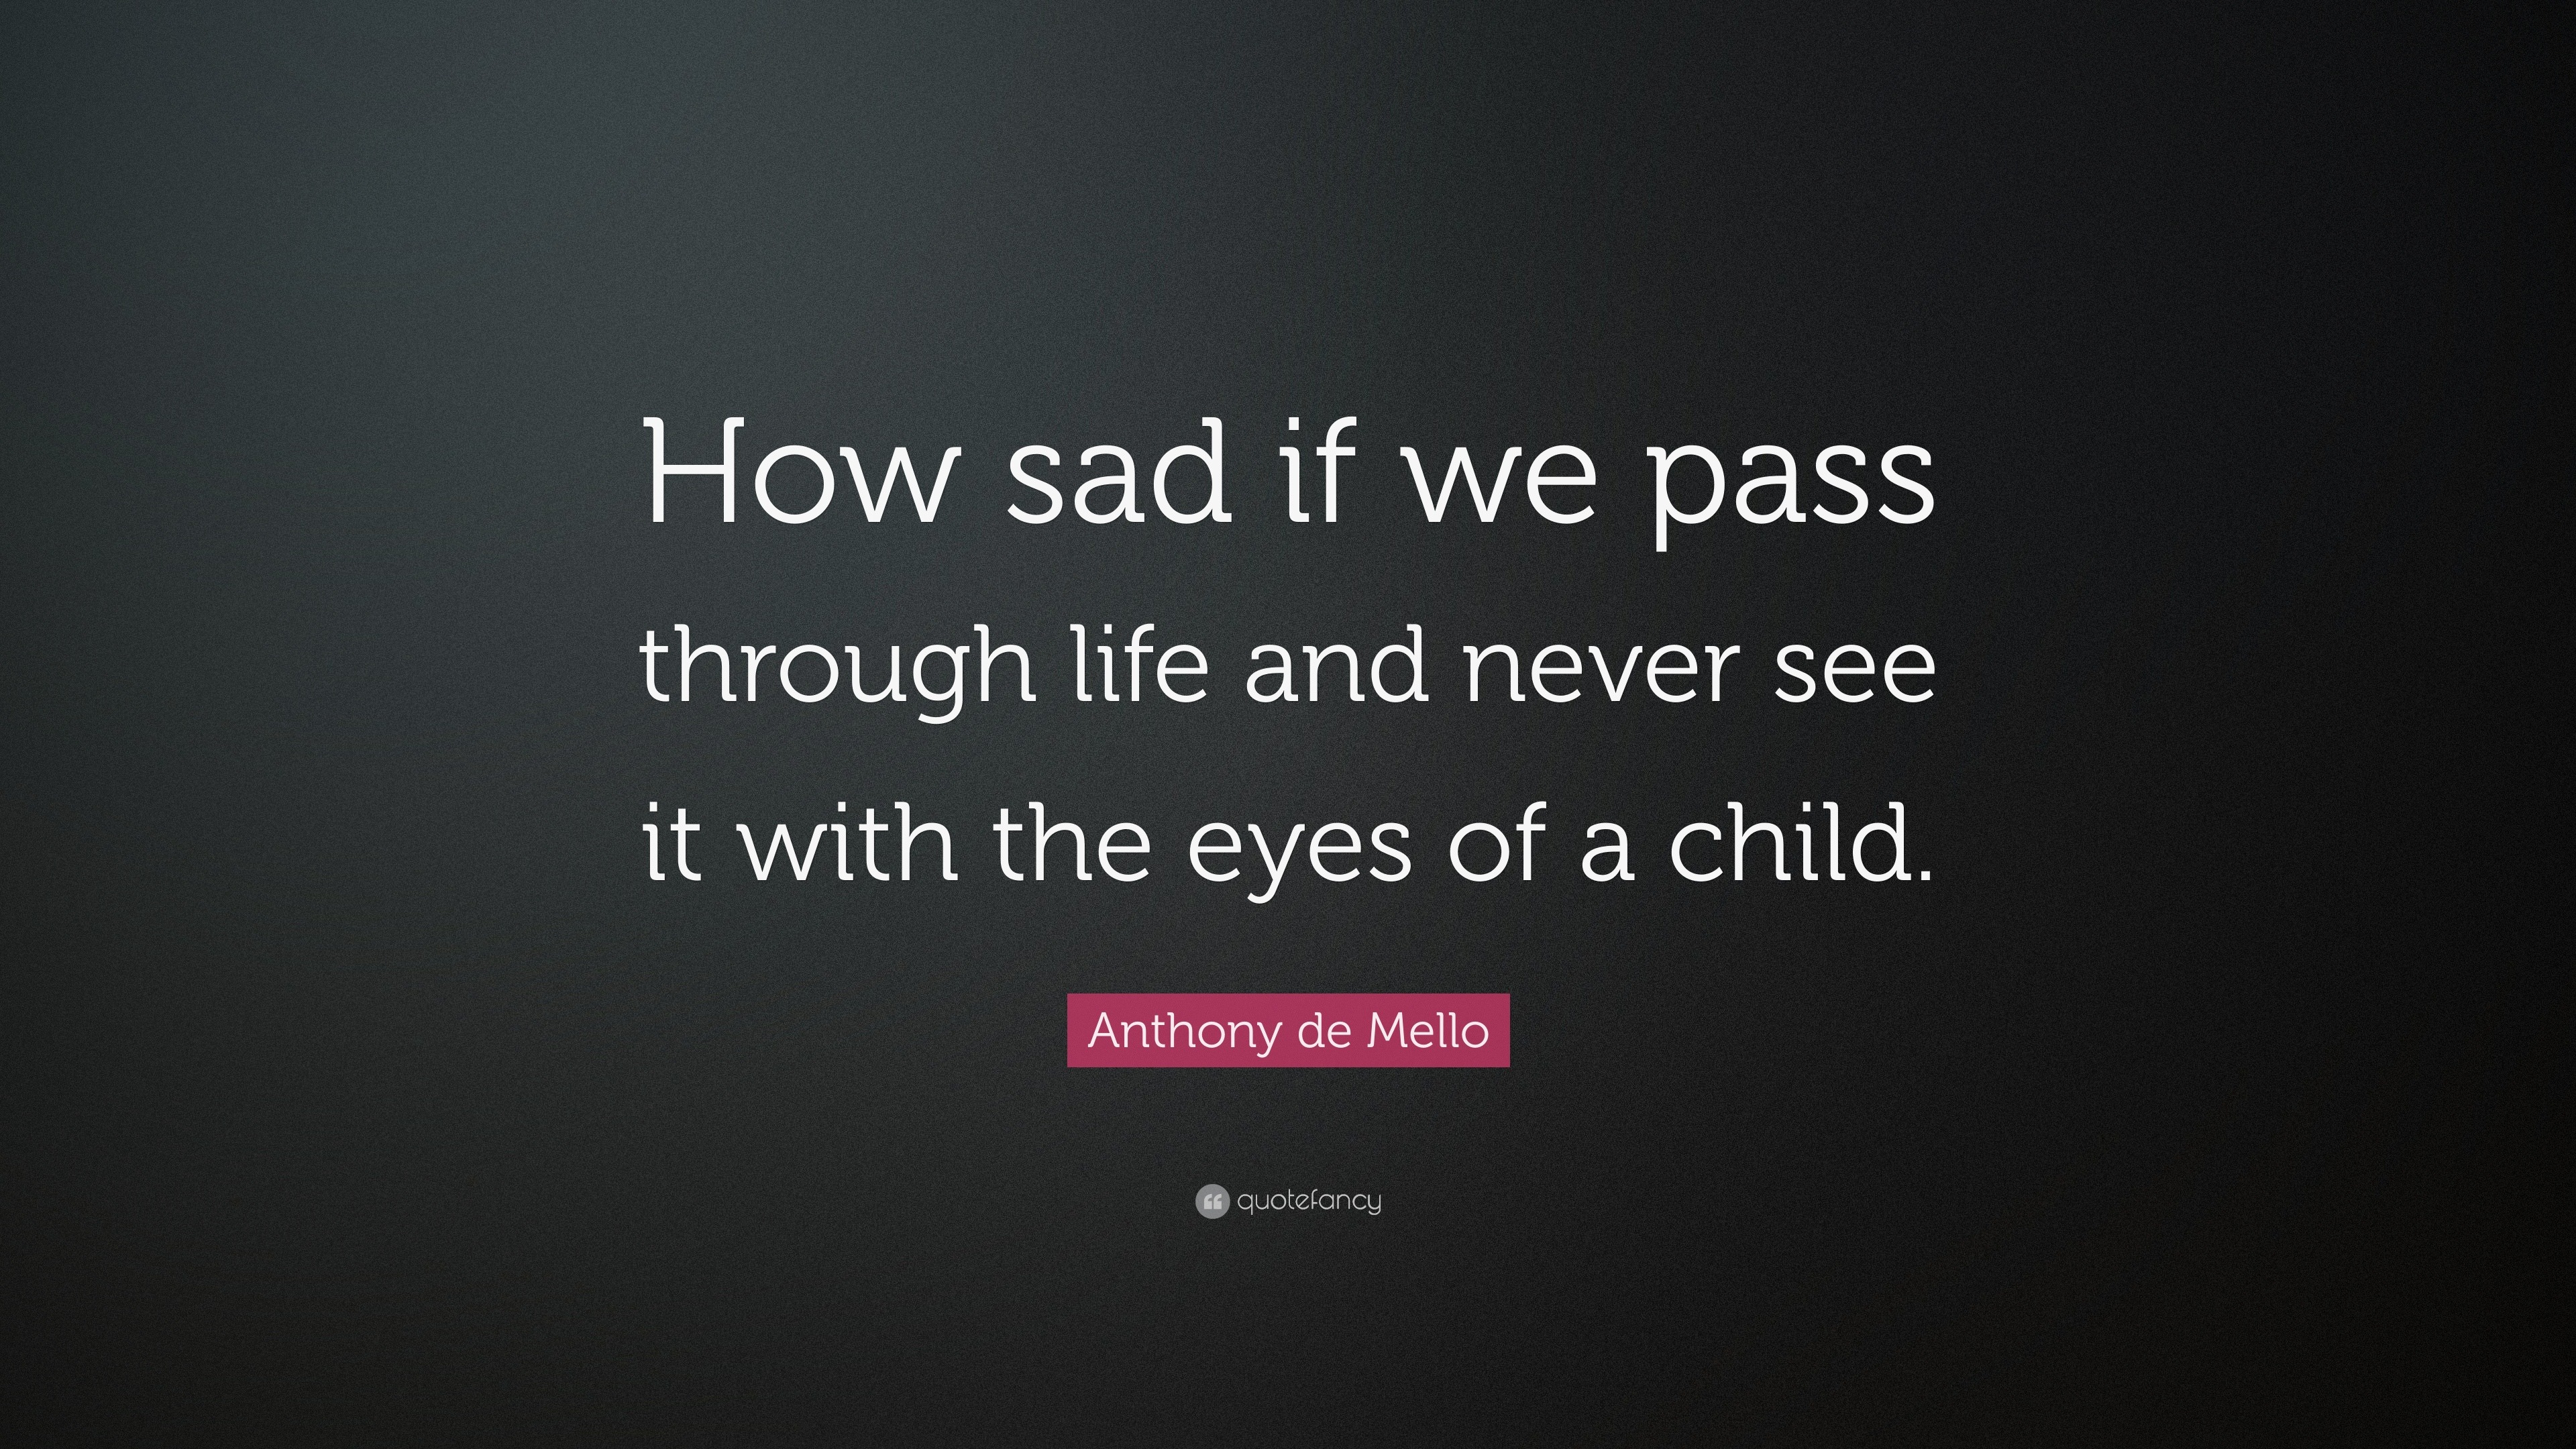 Eyes Of A Child Quote - TOP 15 THROUGH THE EYES OF A CHILD QUOTES | A-Z ...